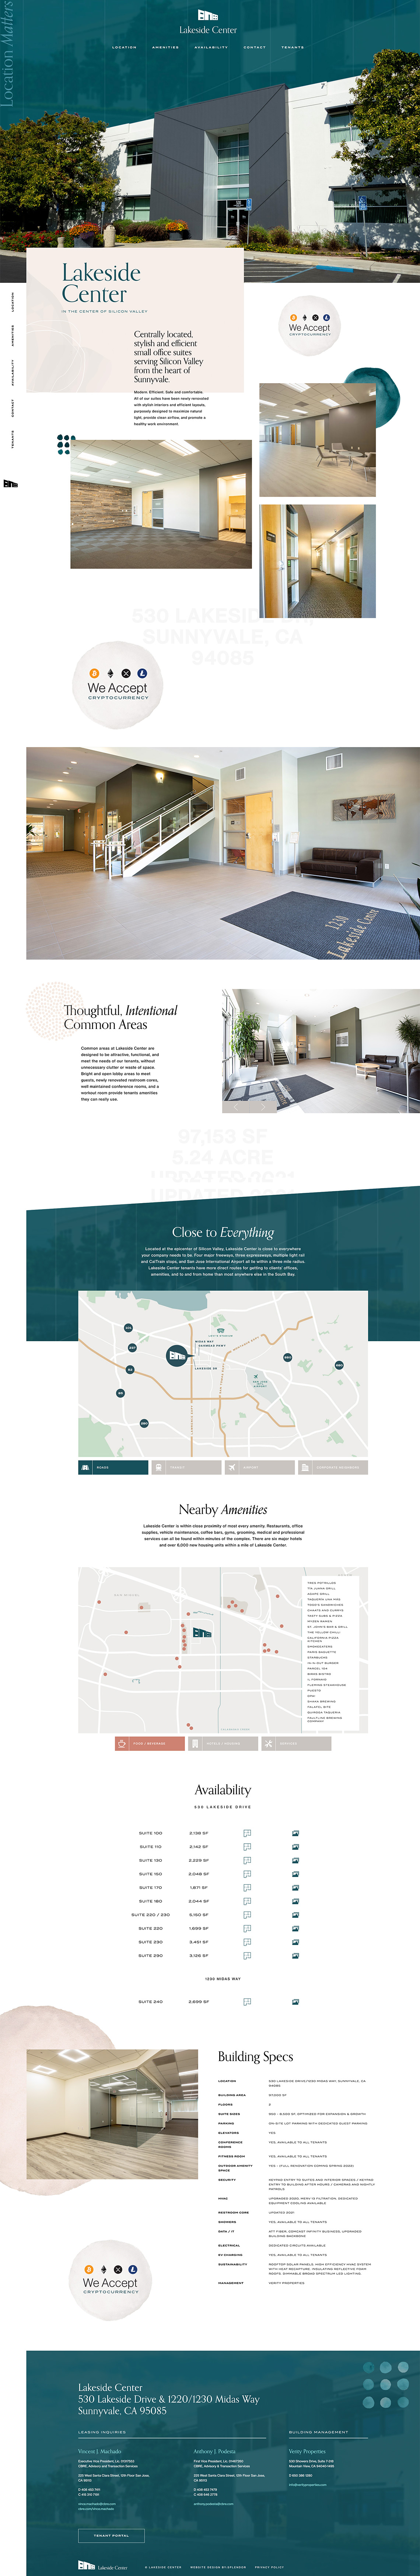 Lakeside Center Website Layout Mockup for small office suite